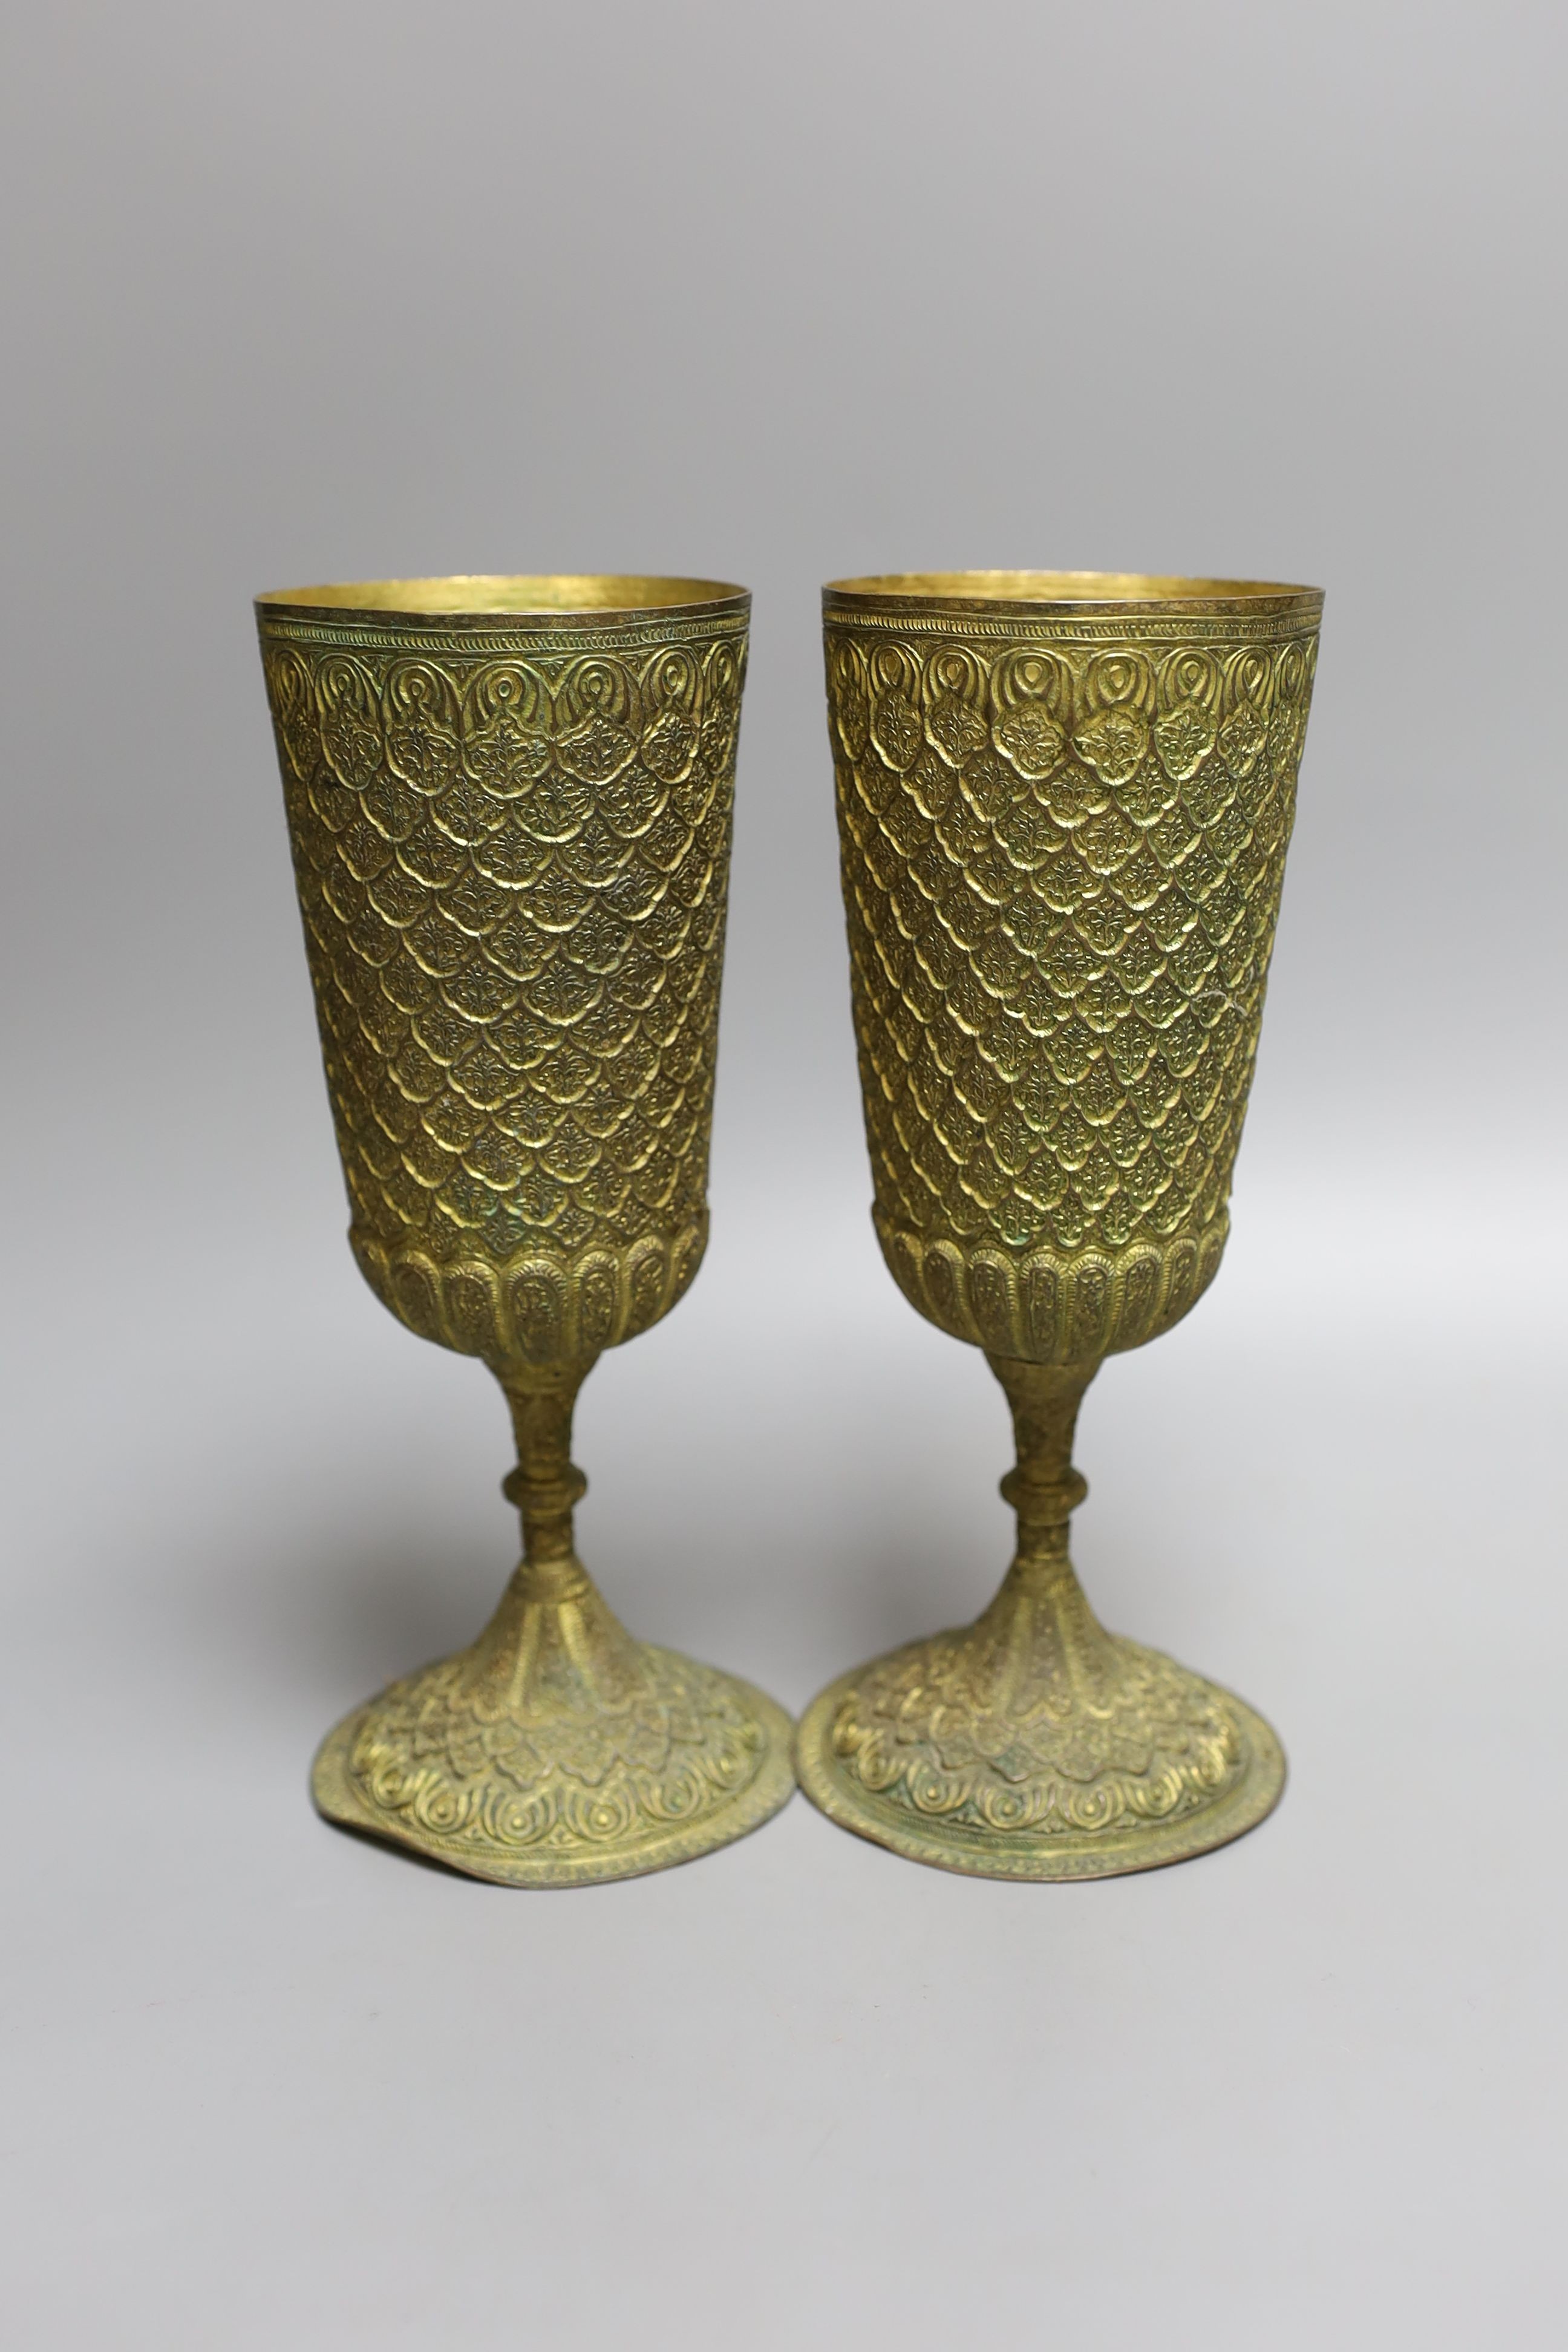 A pair of ornate gilt metal goblets,22cms high. - Image 2 of 4